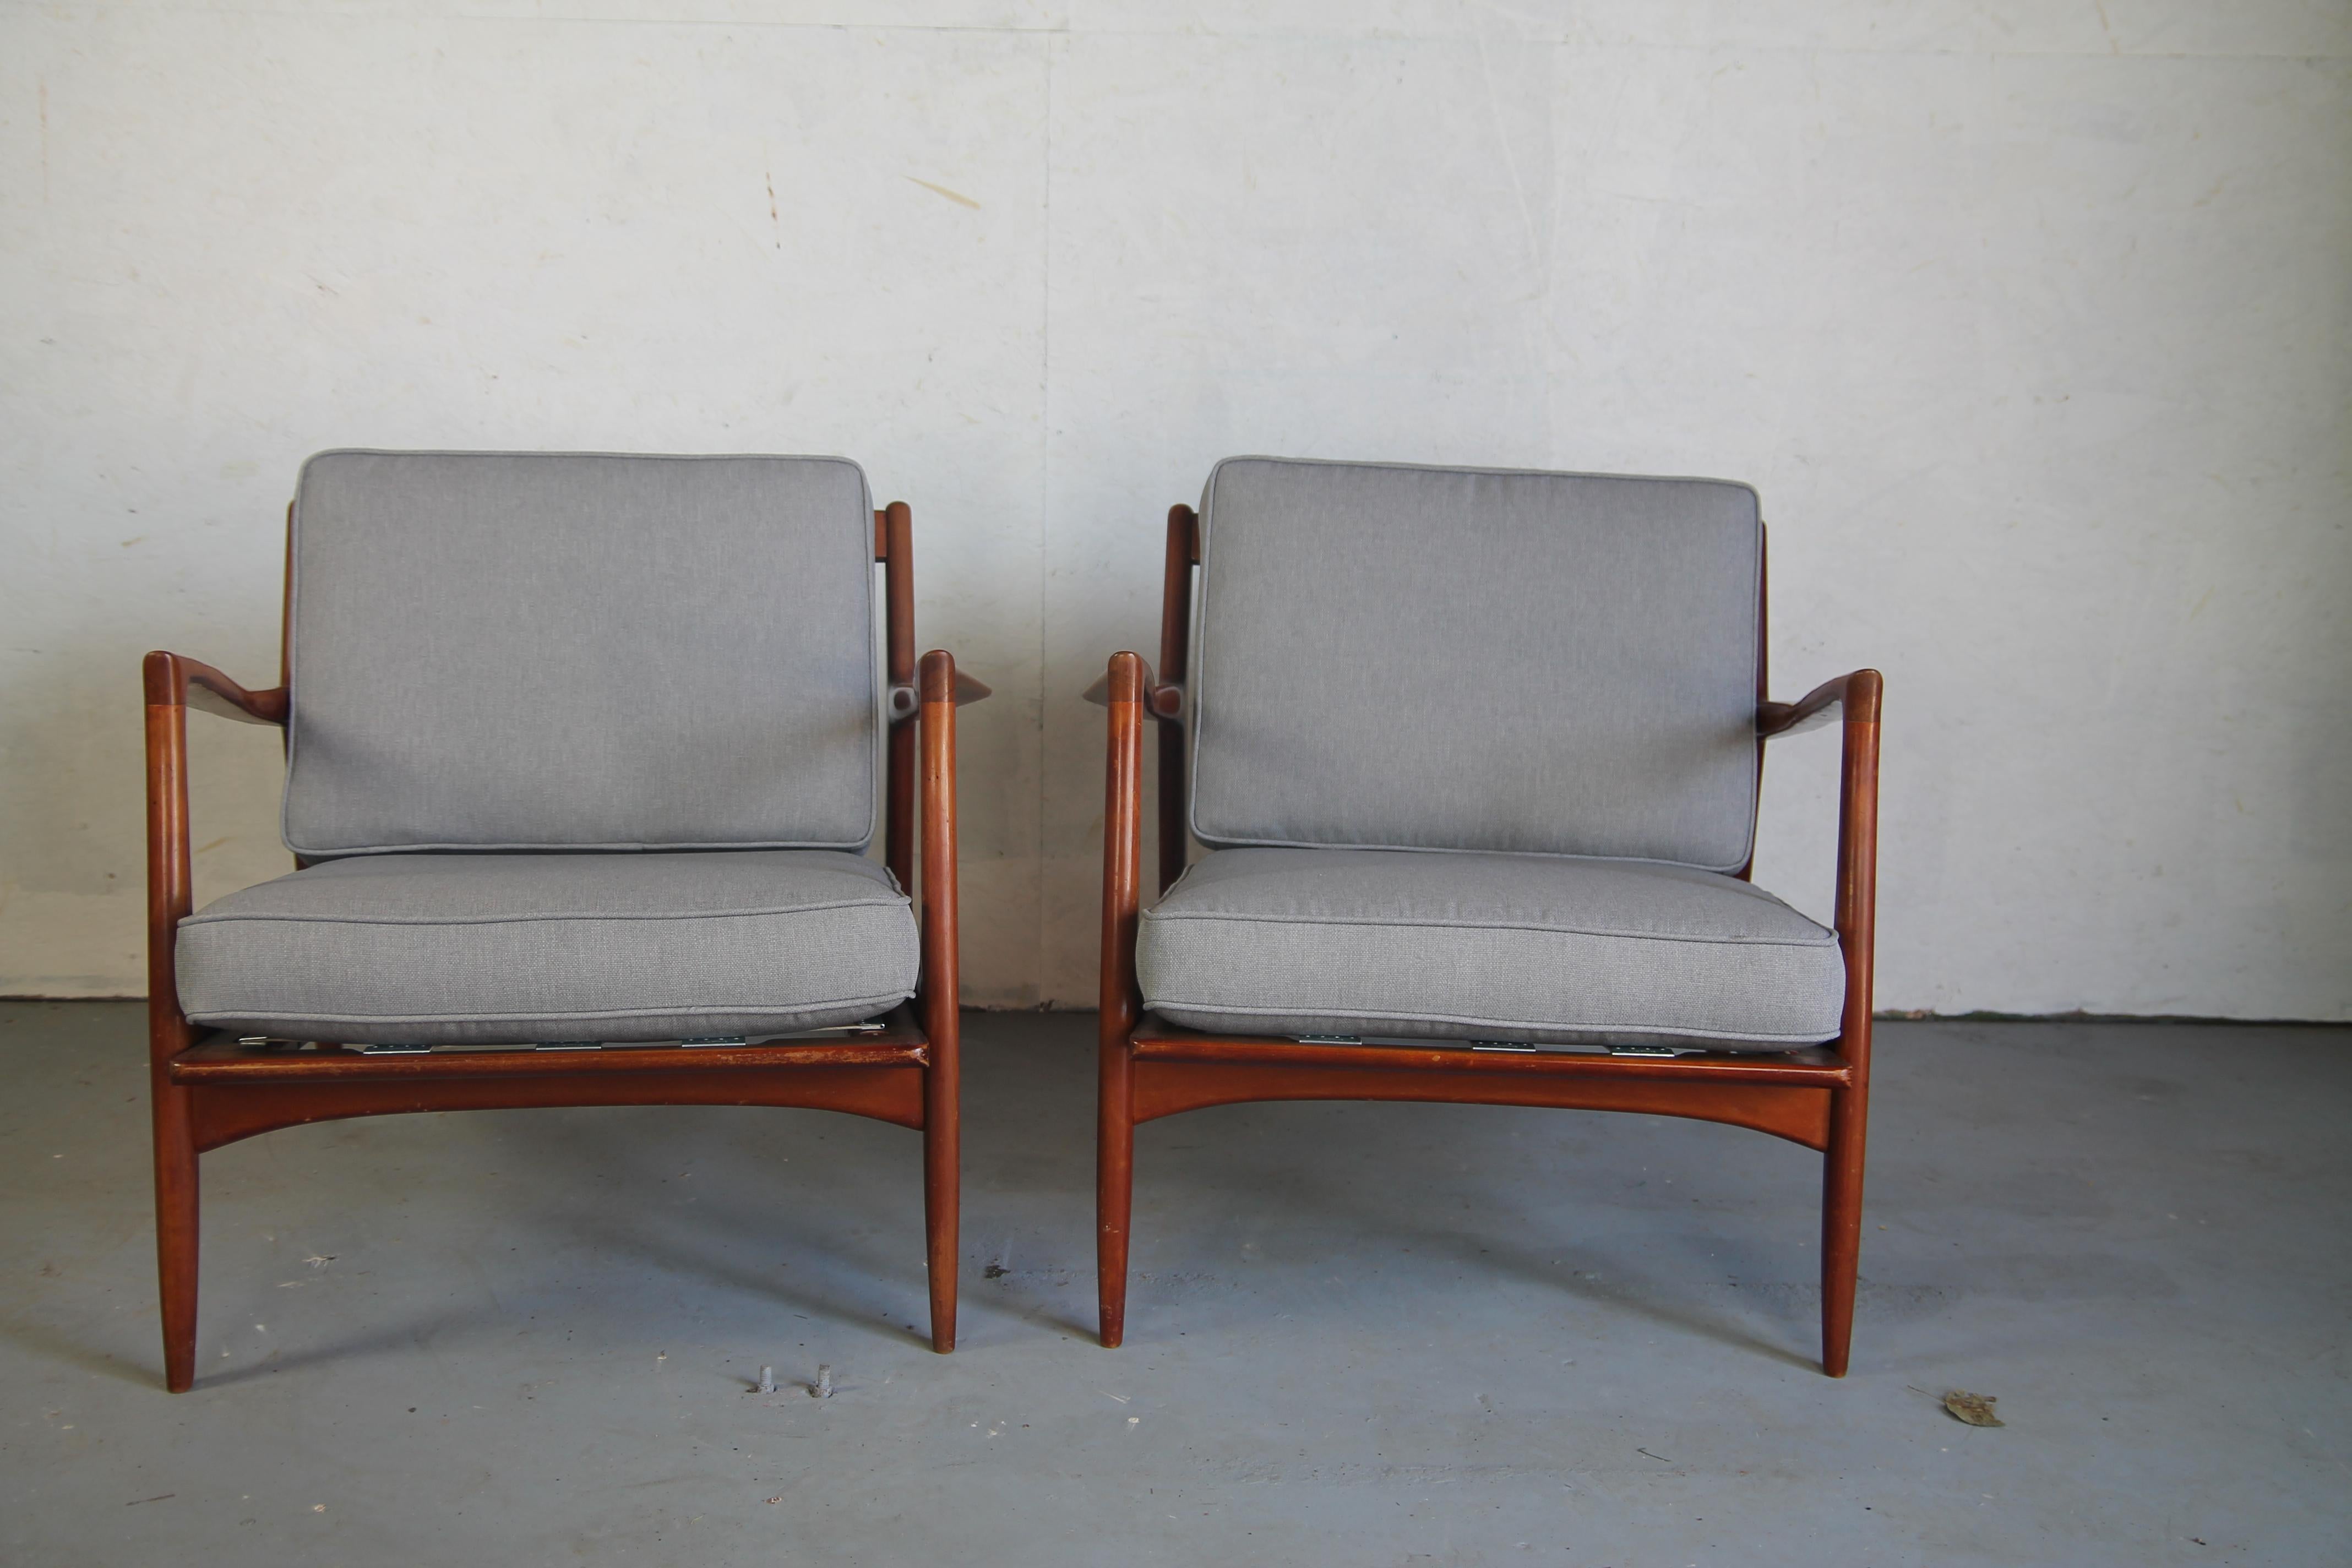 Nice vintage Selig lounge chairs designed by Kofod Larsen. New upholstery and correct straps.